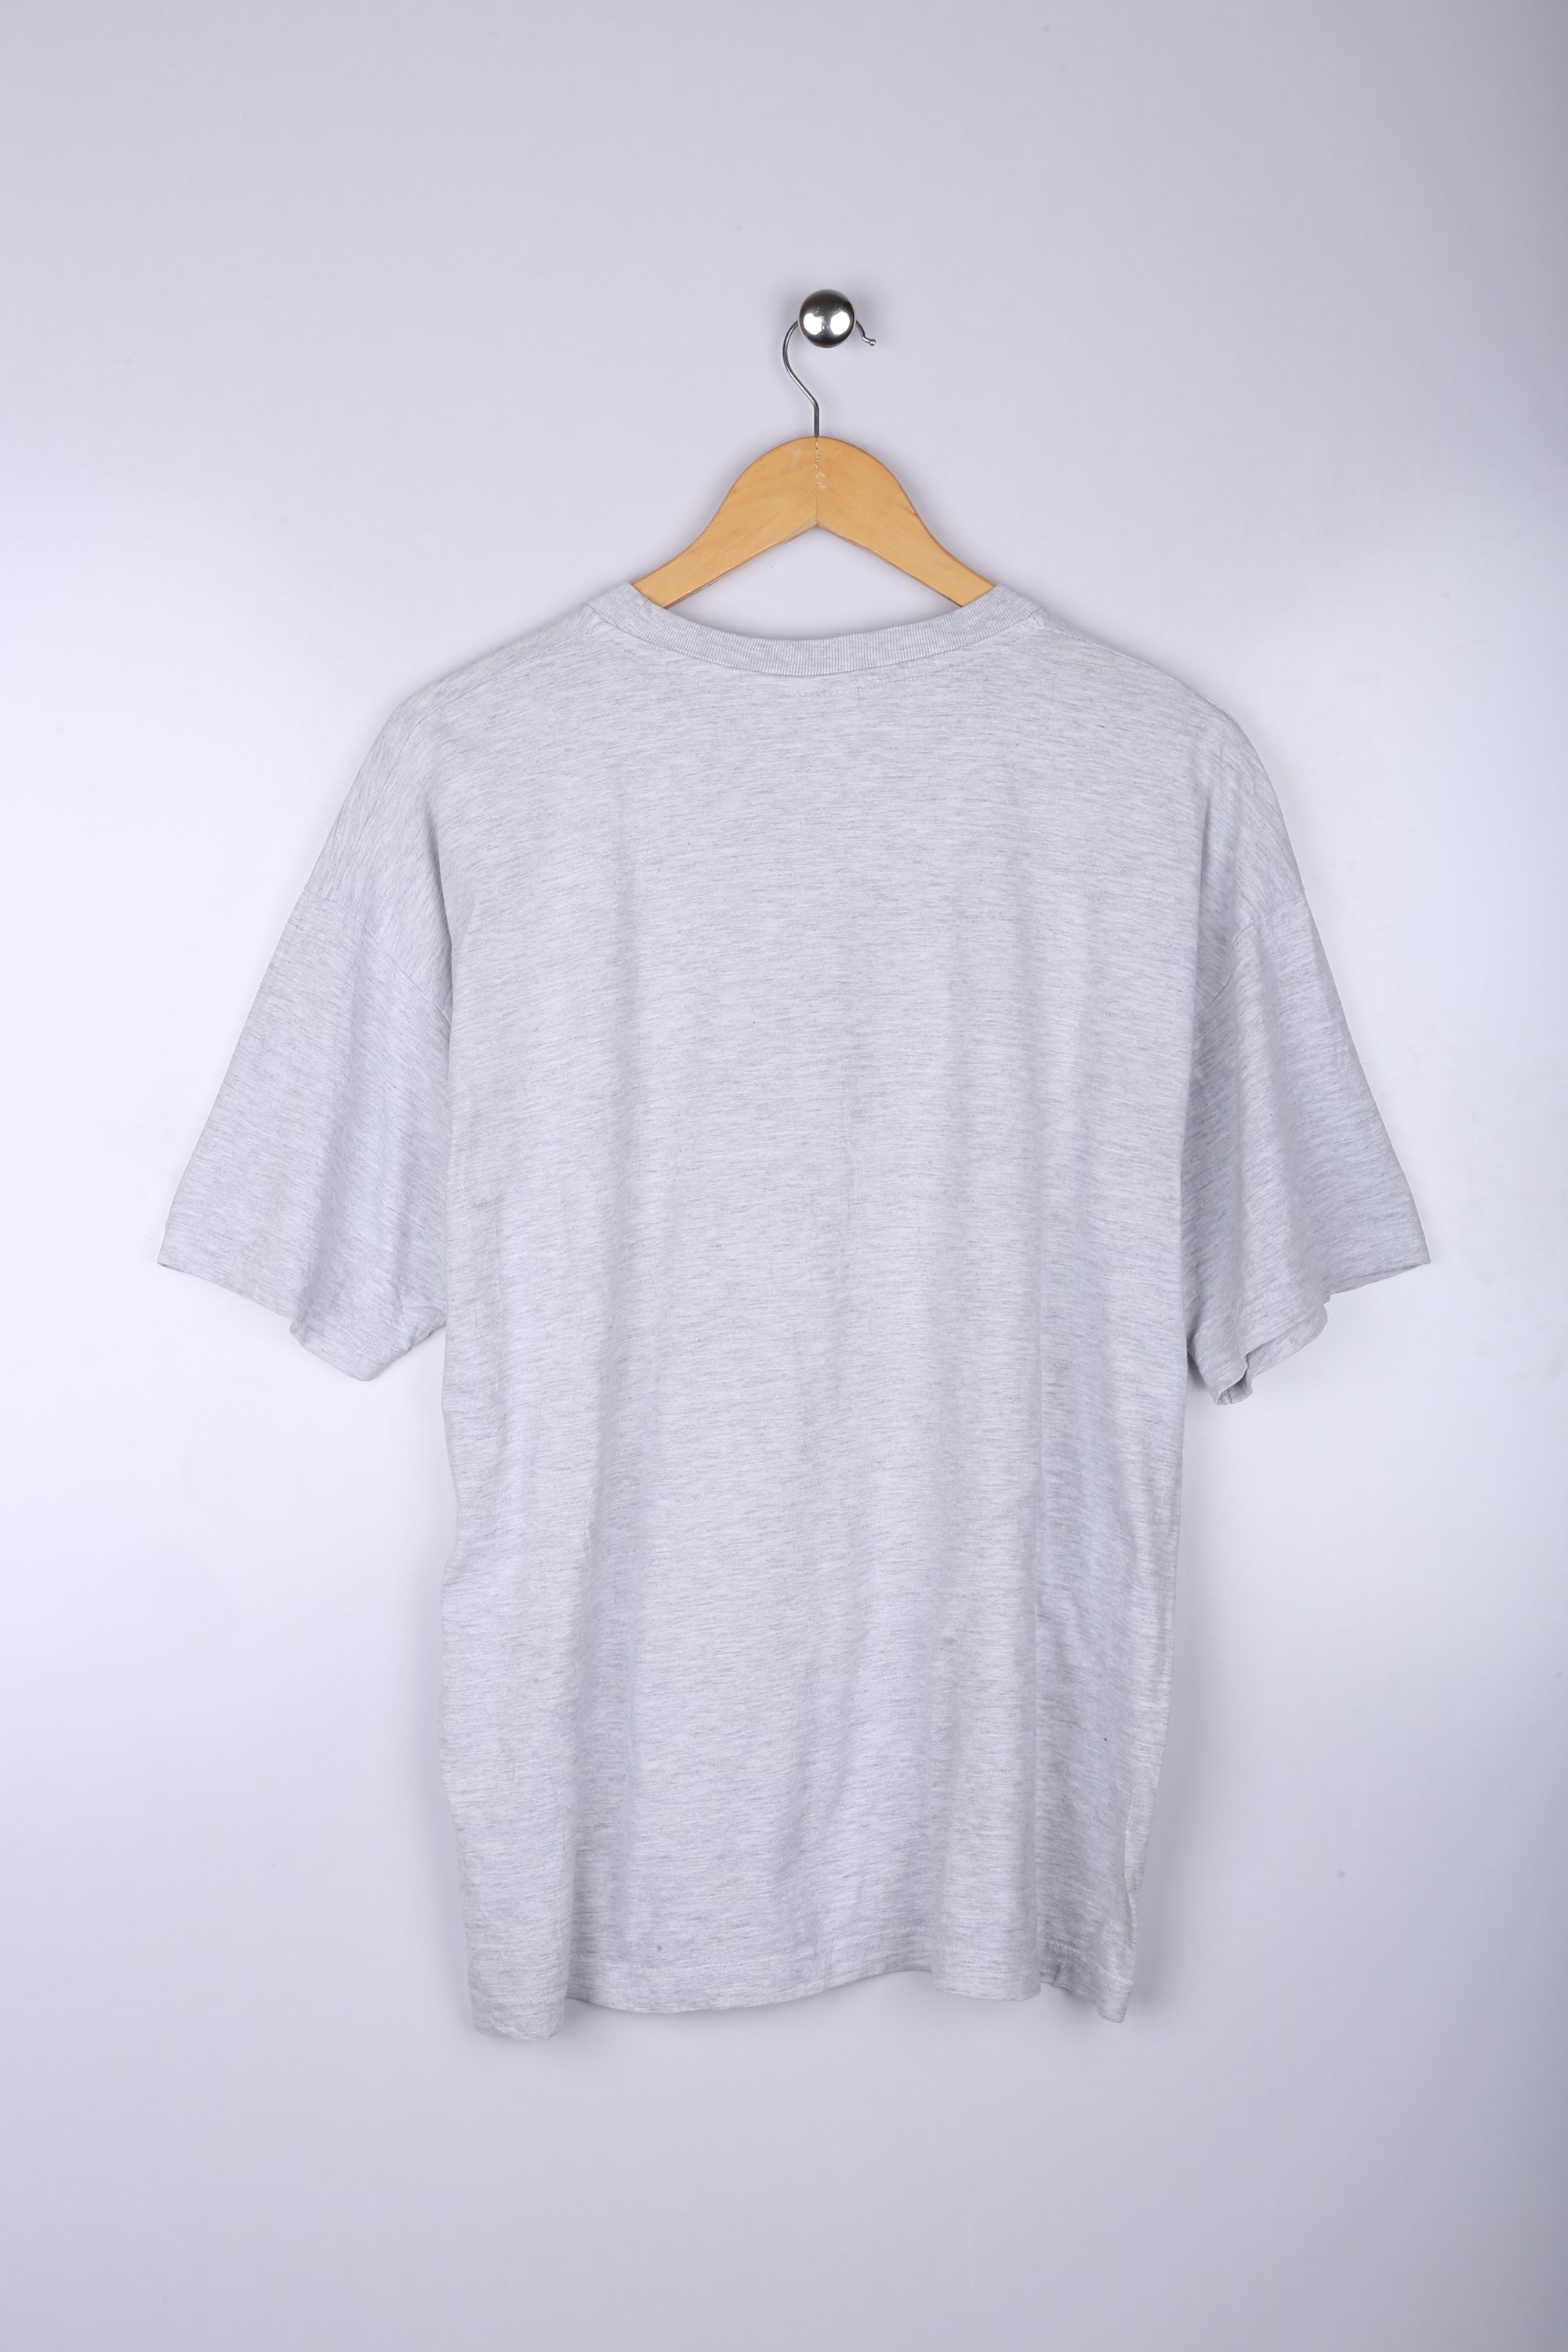 Vintage Whale Graphic Tee Grey X Large